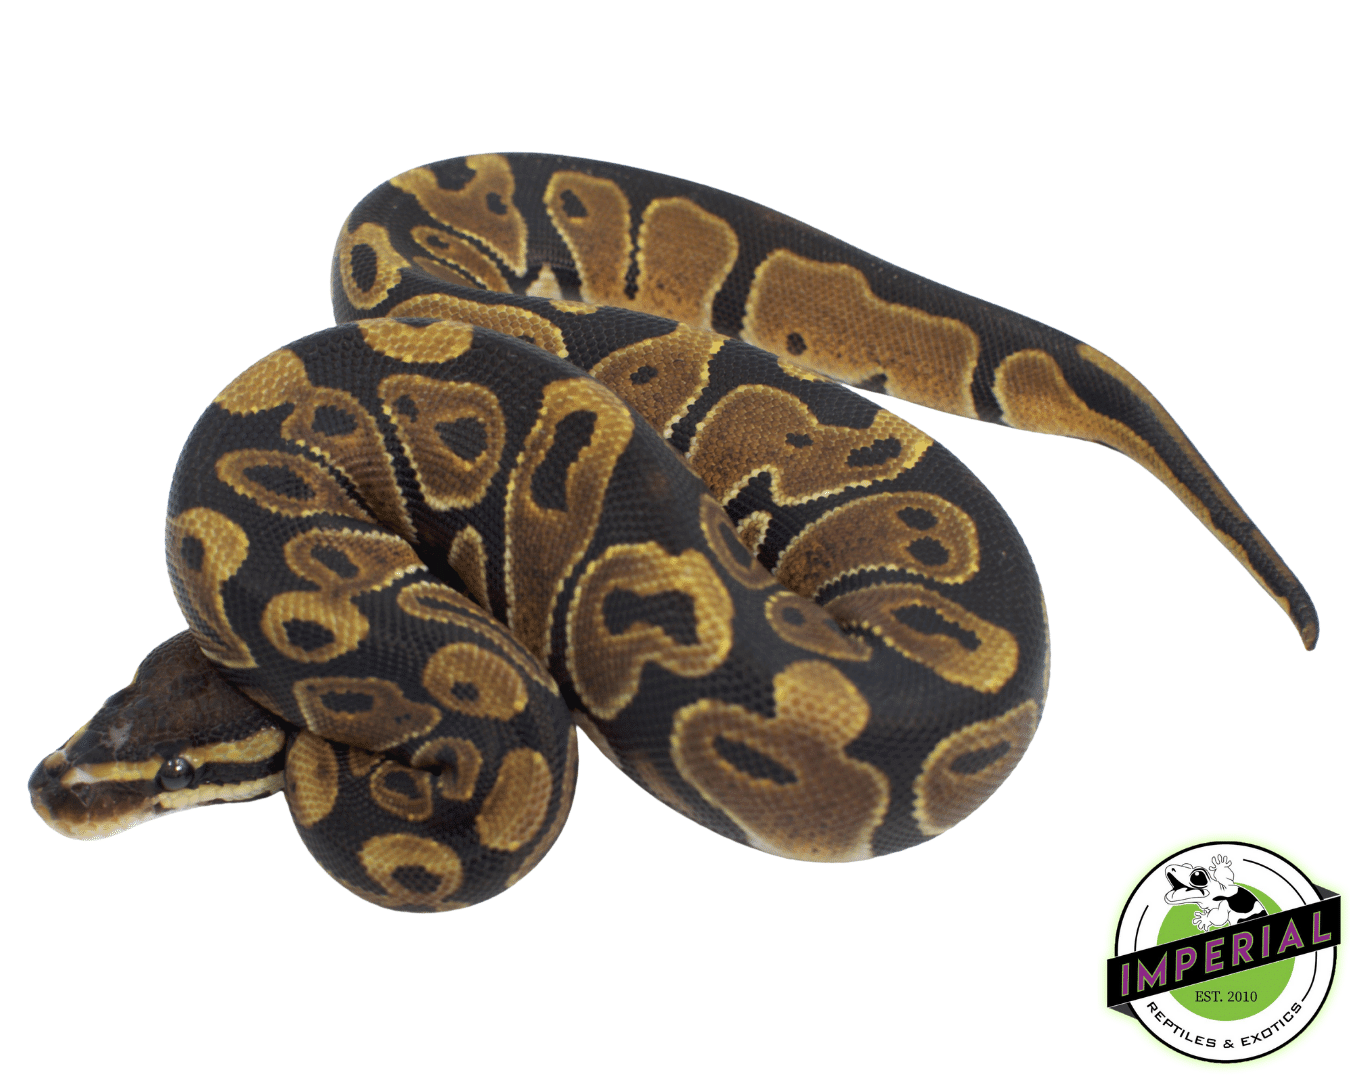 scaleless head ball python for sale, buy reptiles online